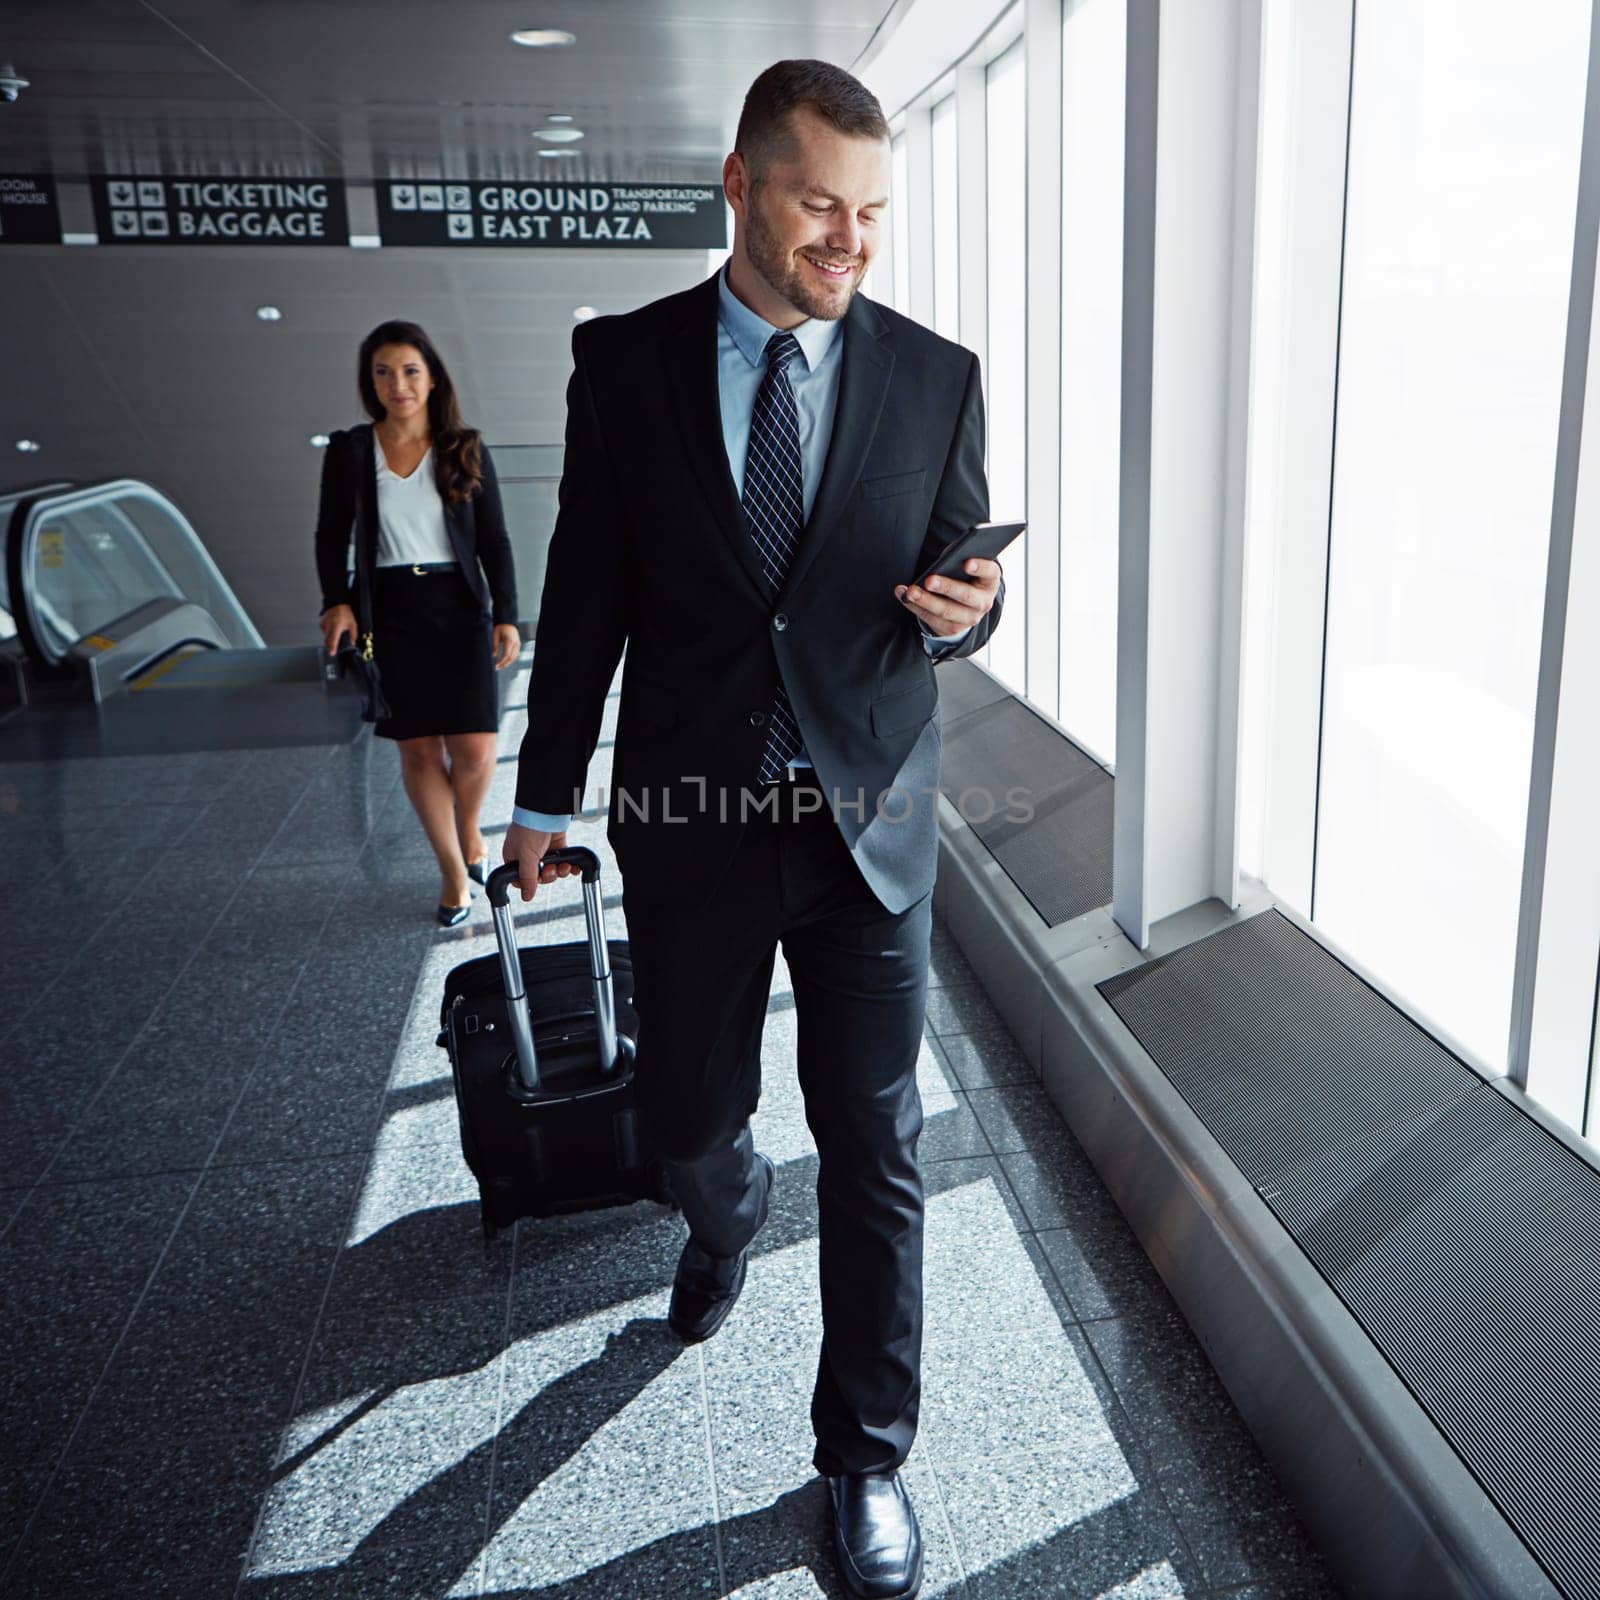 Business man, smartphone and suitcase in airport hallway with smile, thinking or idea for international travel. Entrepreneur, luggage and phone with flight schedule for global immigration in London.